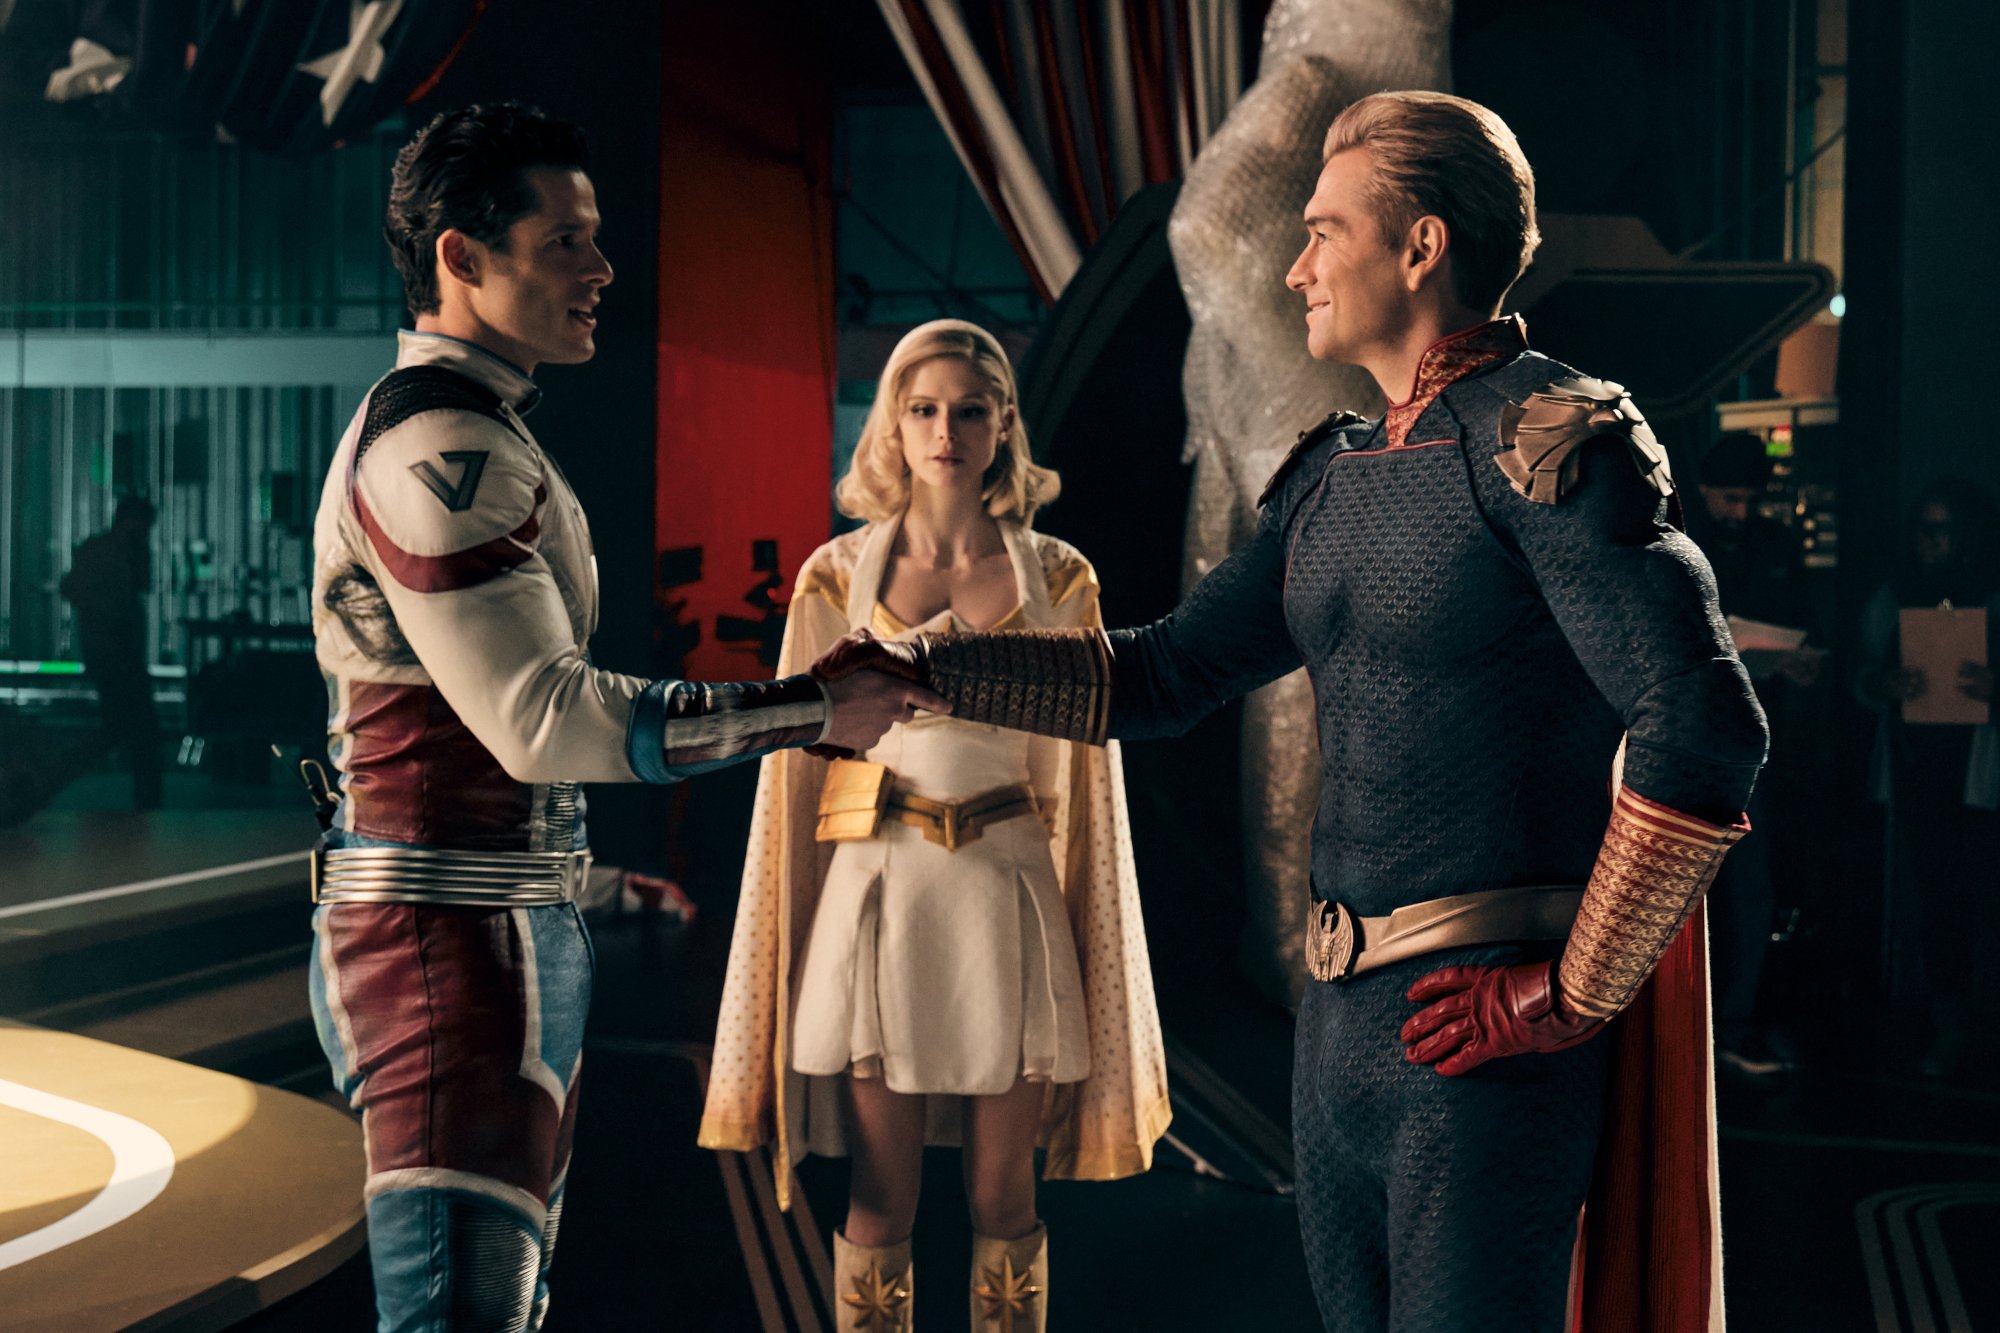 Miles Gaston Villanueva, Erin Moriarty, and Antony Starr as Supersonic, Starlight, and Homelander in the early episodes of 'The Boys' Season 3. Supersonic and Homelander are shaking hands, and Starlight stands between them.